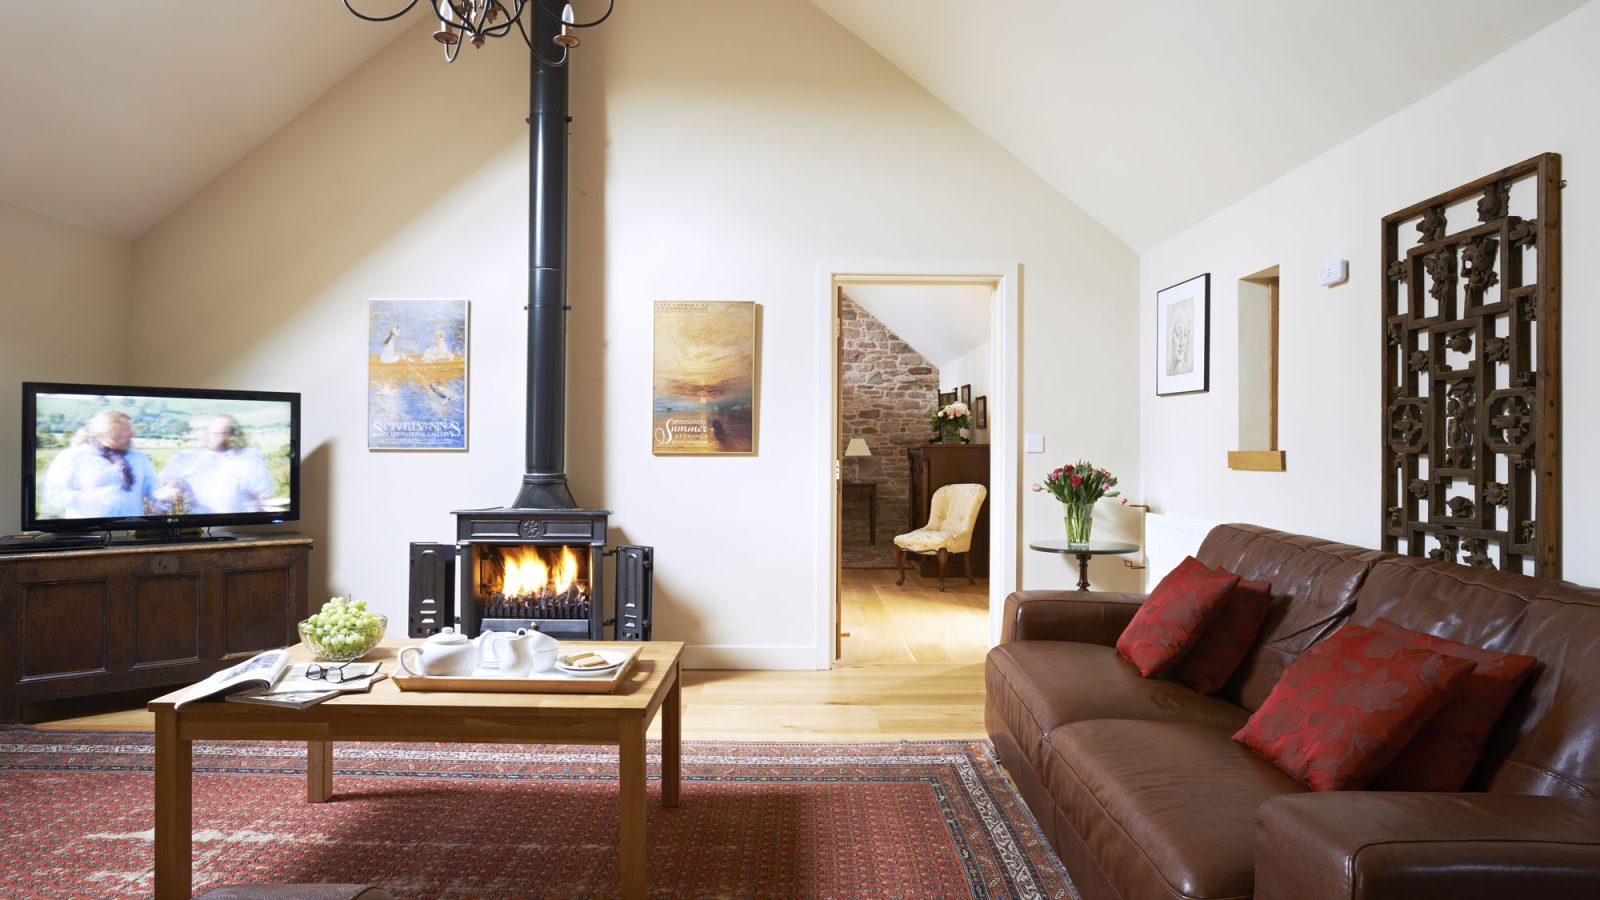 Fell Cottage - kate & tom's Large Holiday Homes